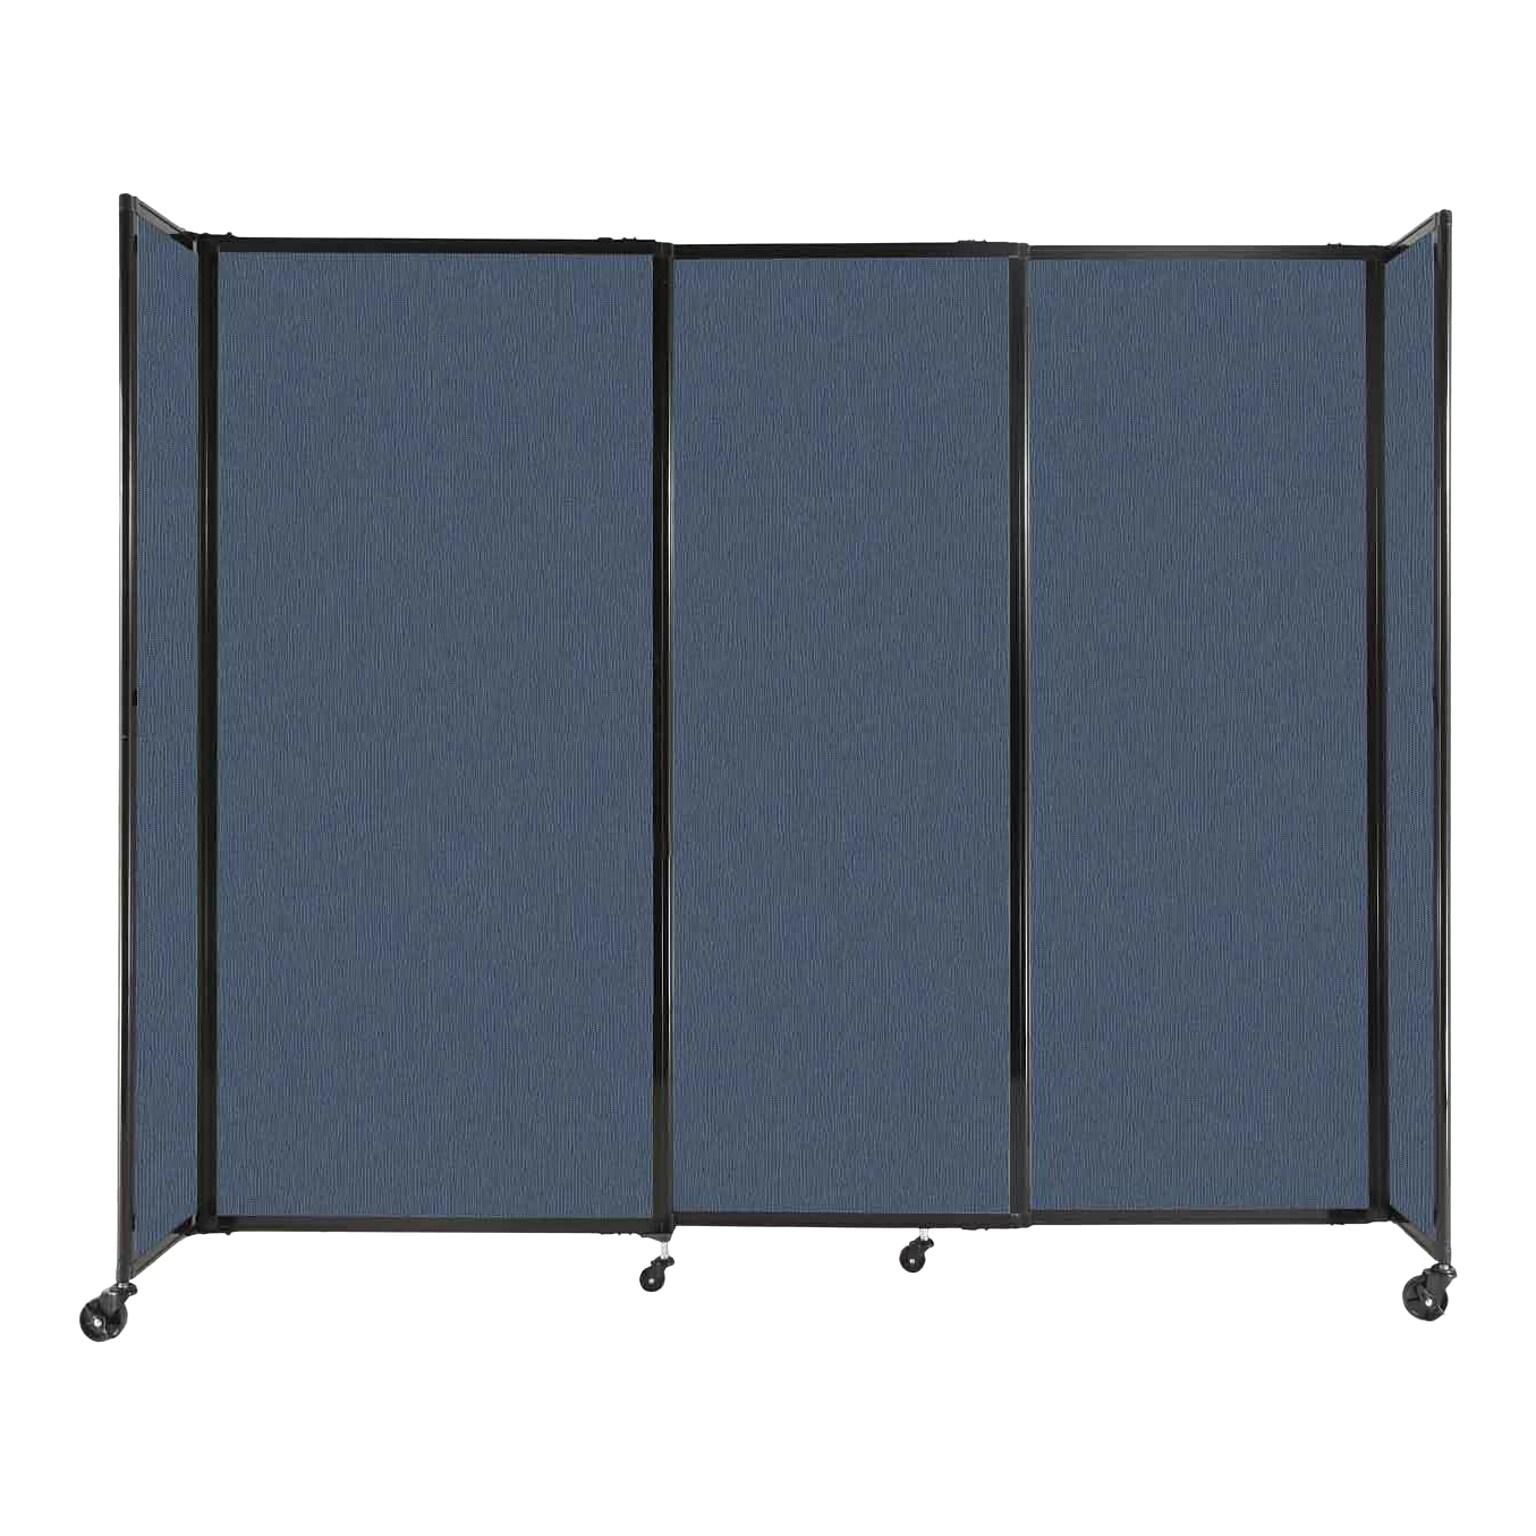 Versare StraightWall Freestanding Mobile Partition, 72H x 86W, Ocean Fabric (1472315)